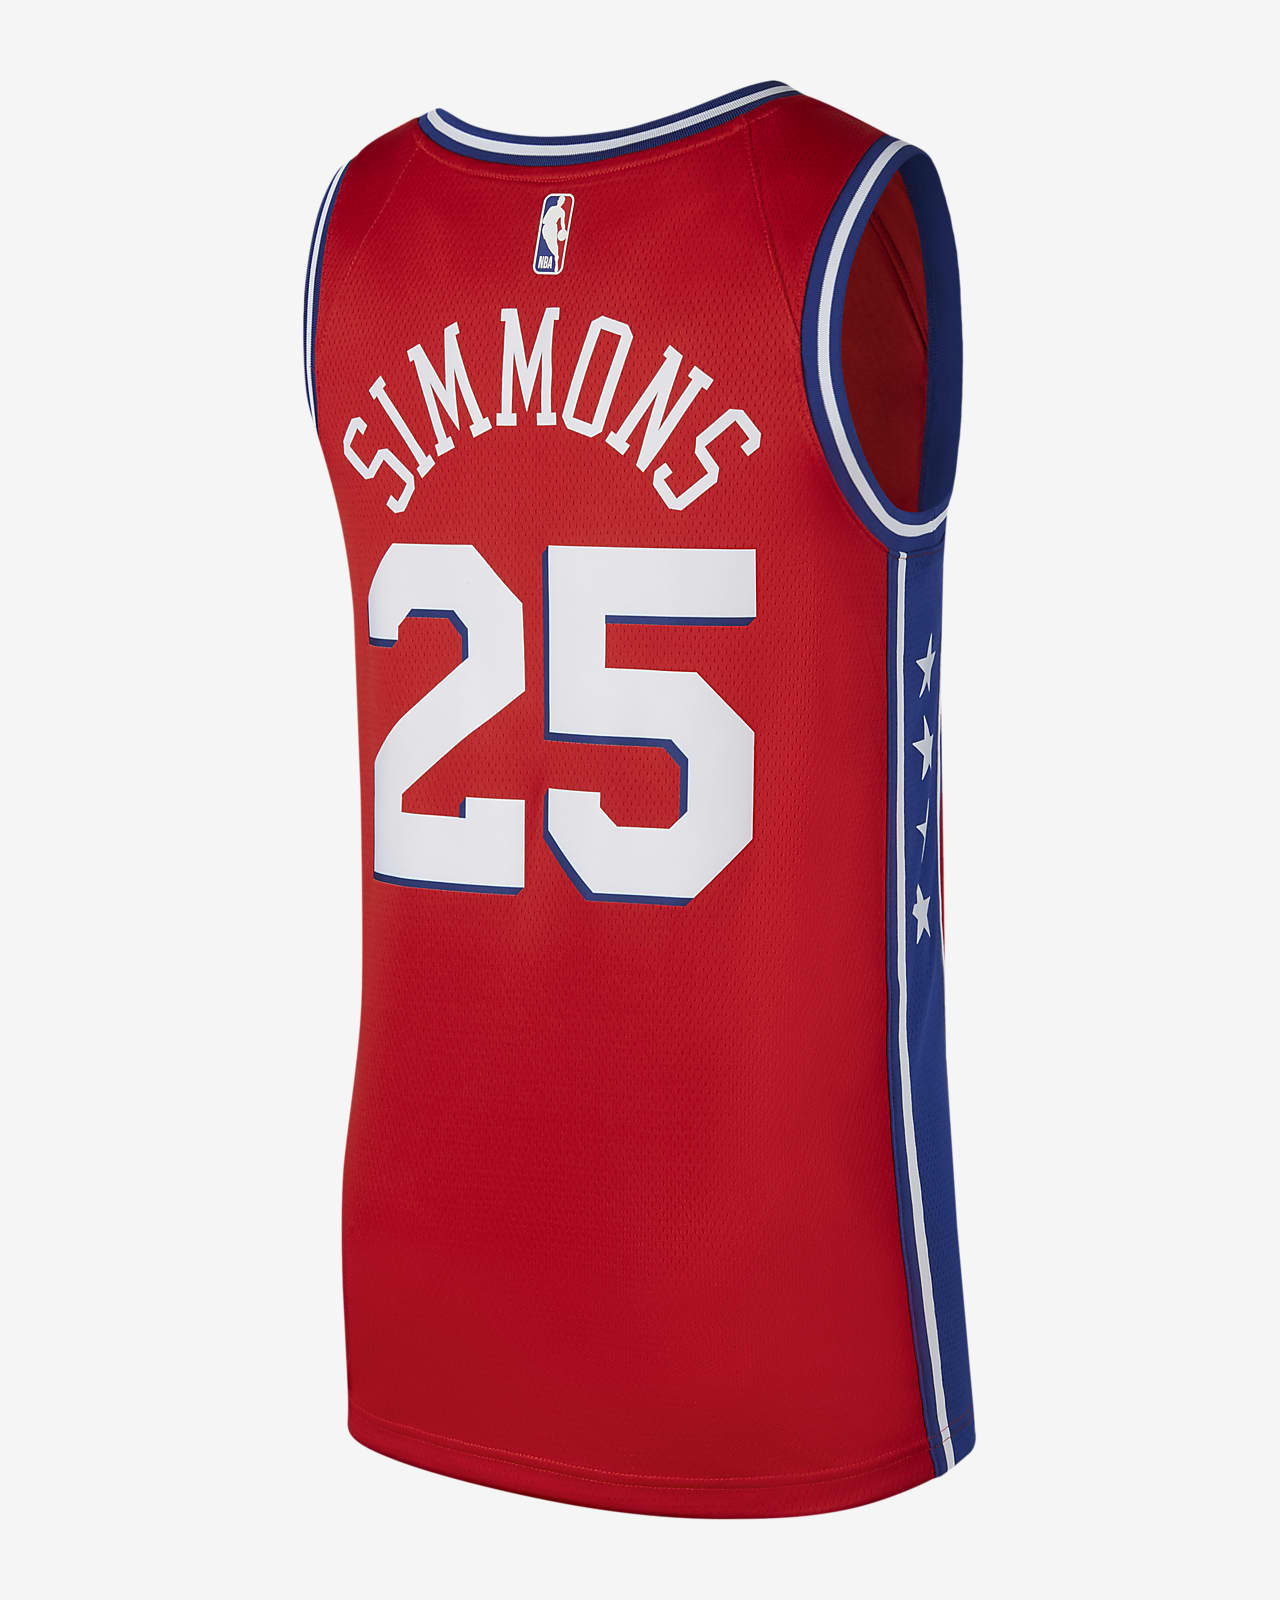 Sixers City Jersey 2020 : Espn On Twitter The Sixers Reveal Their 2020 ...